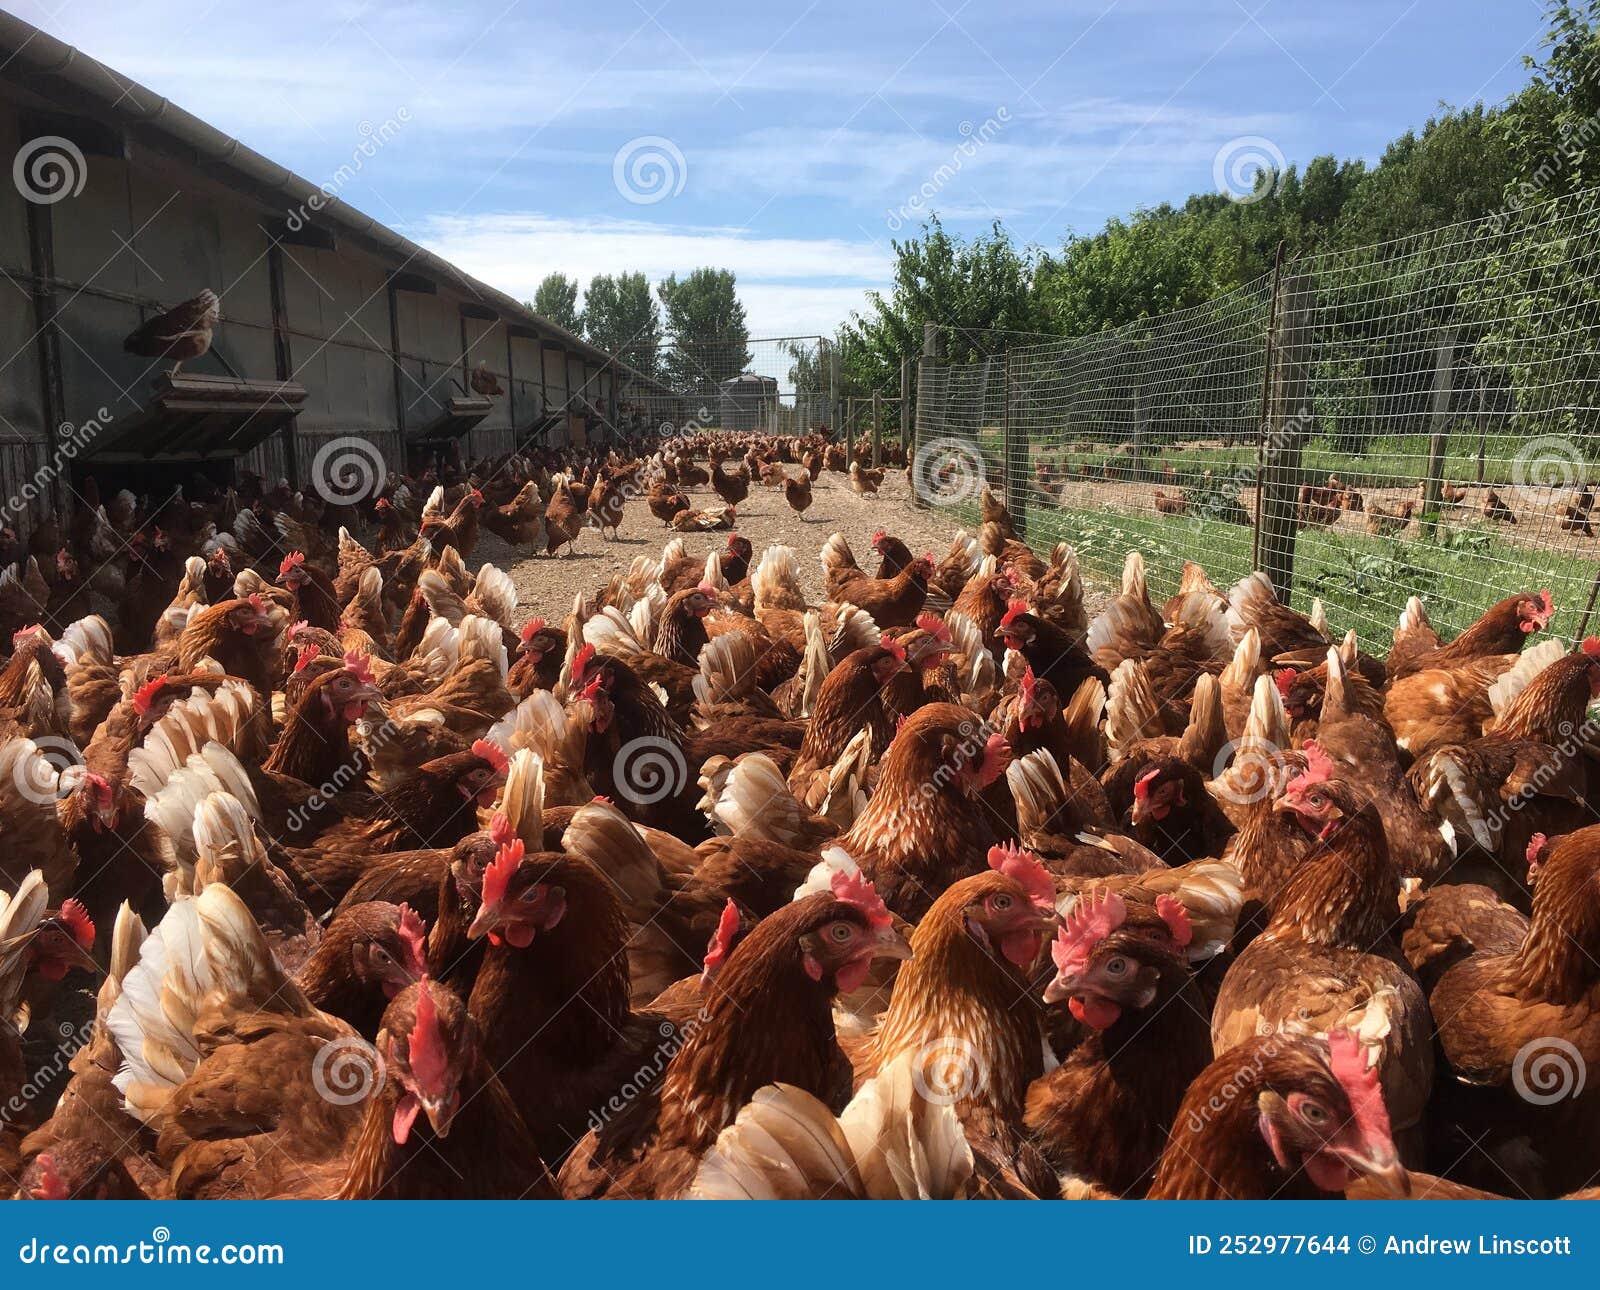 layer hens on a farm outdoors